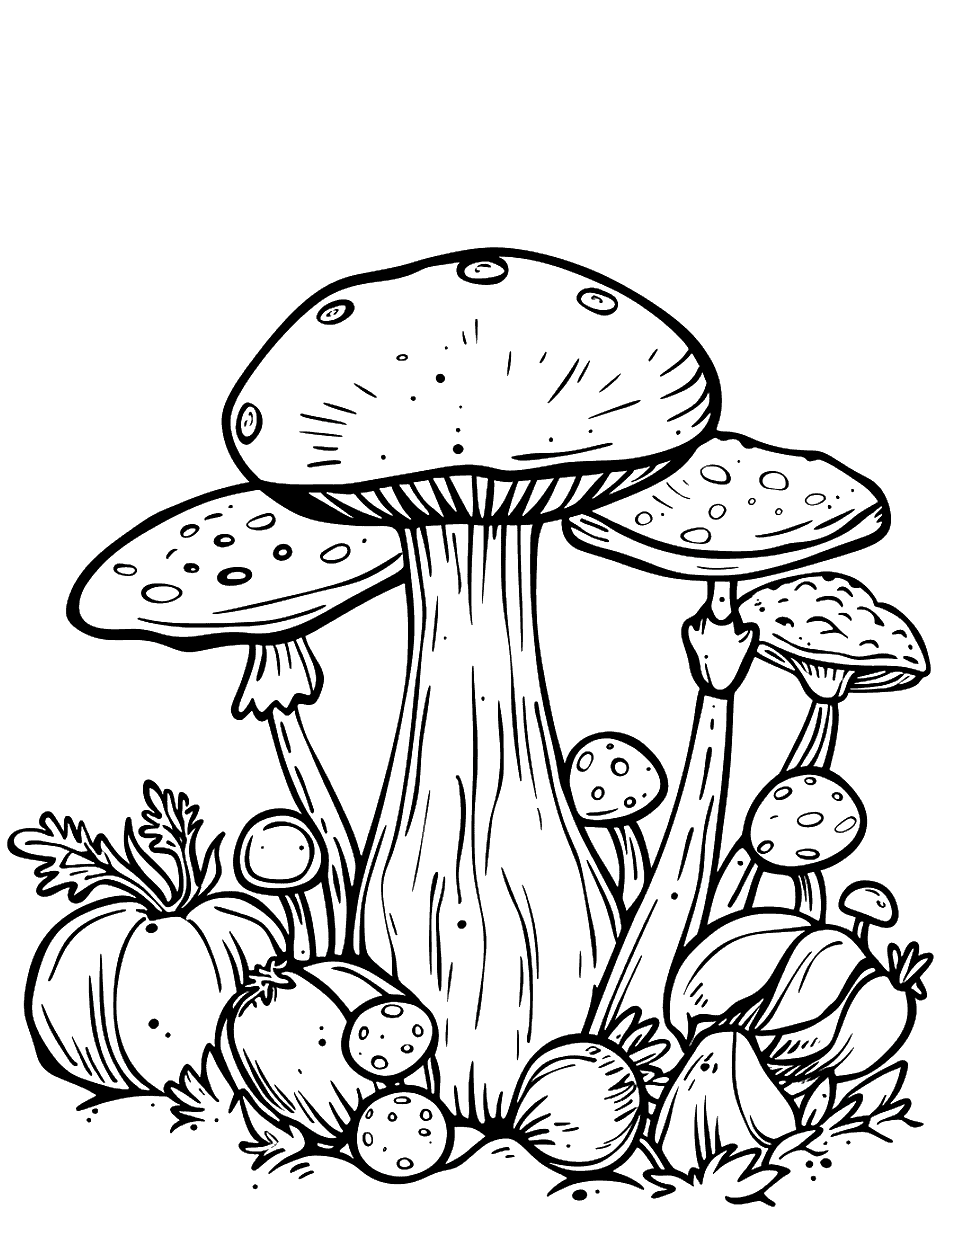 Vegetable Garden with Mushrooms Mushroom Coloring Page - A variety of vegetables and a few mushrooms growing in a garden bed.